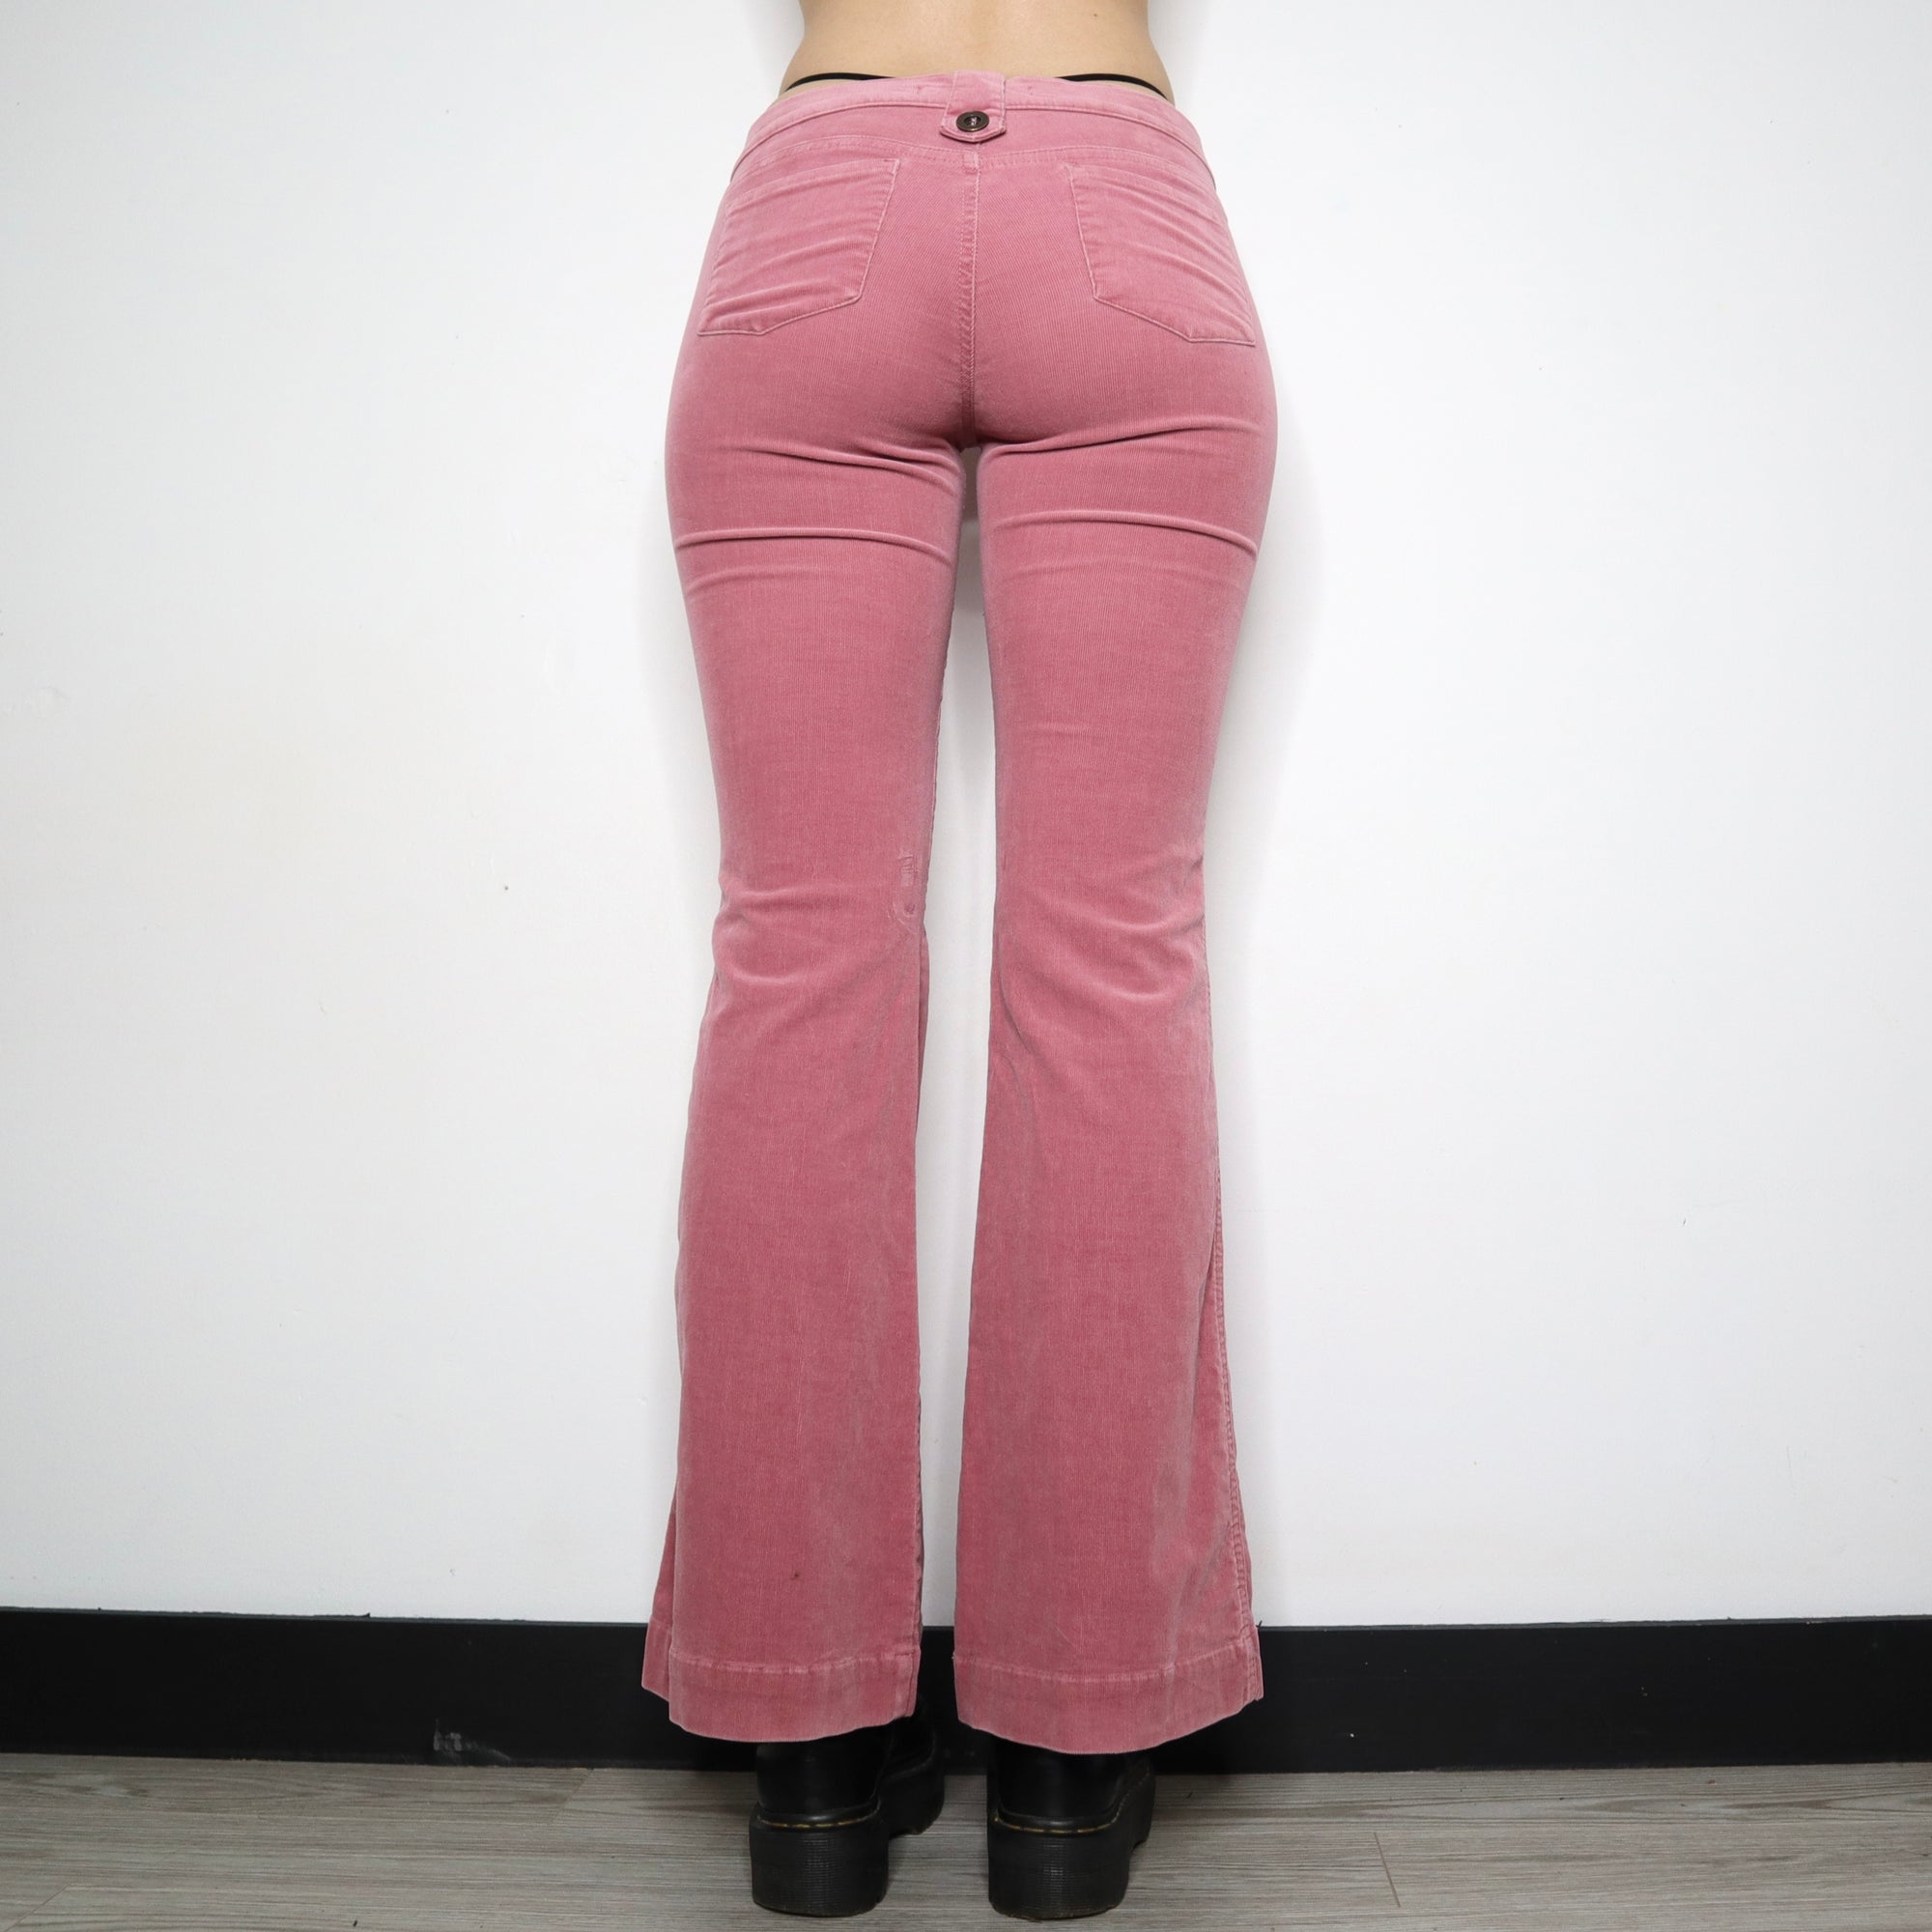 Vintage Early 2000s Dusty Pink Low Rise Corduroy Flare Pants - Imber Vintage